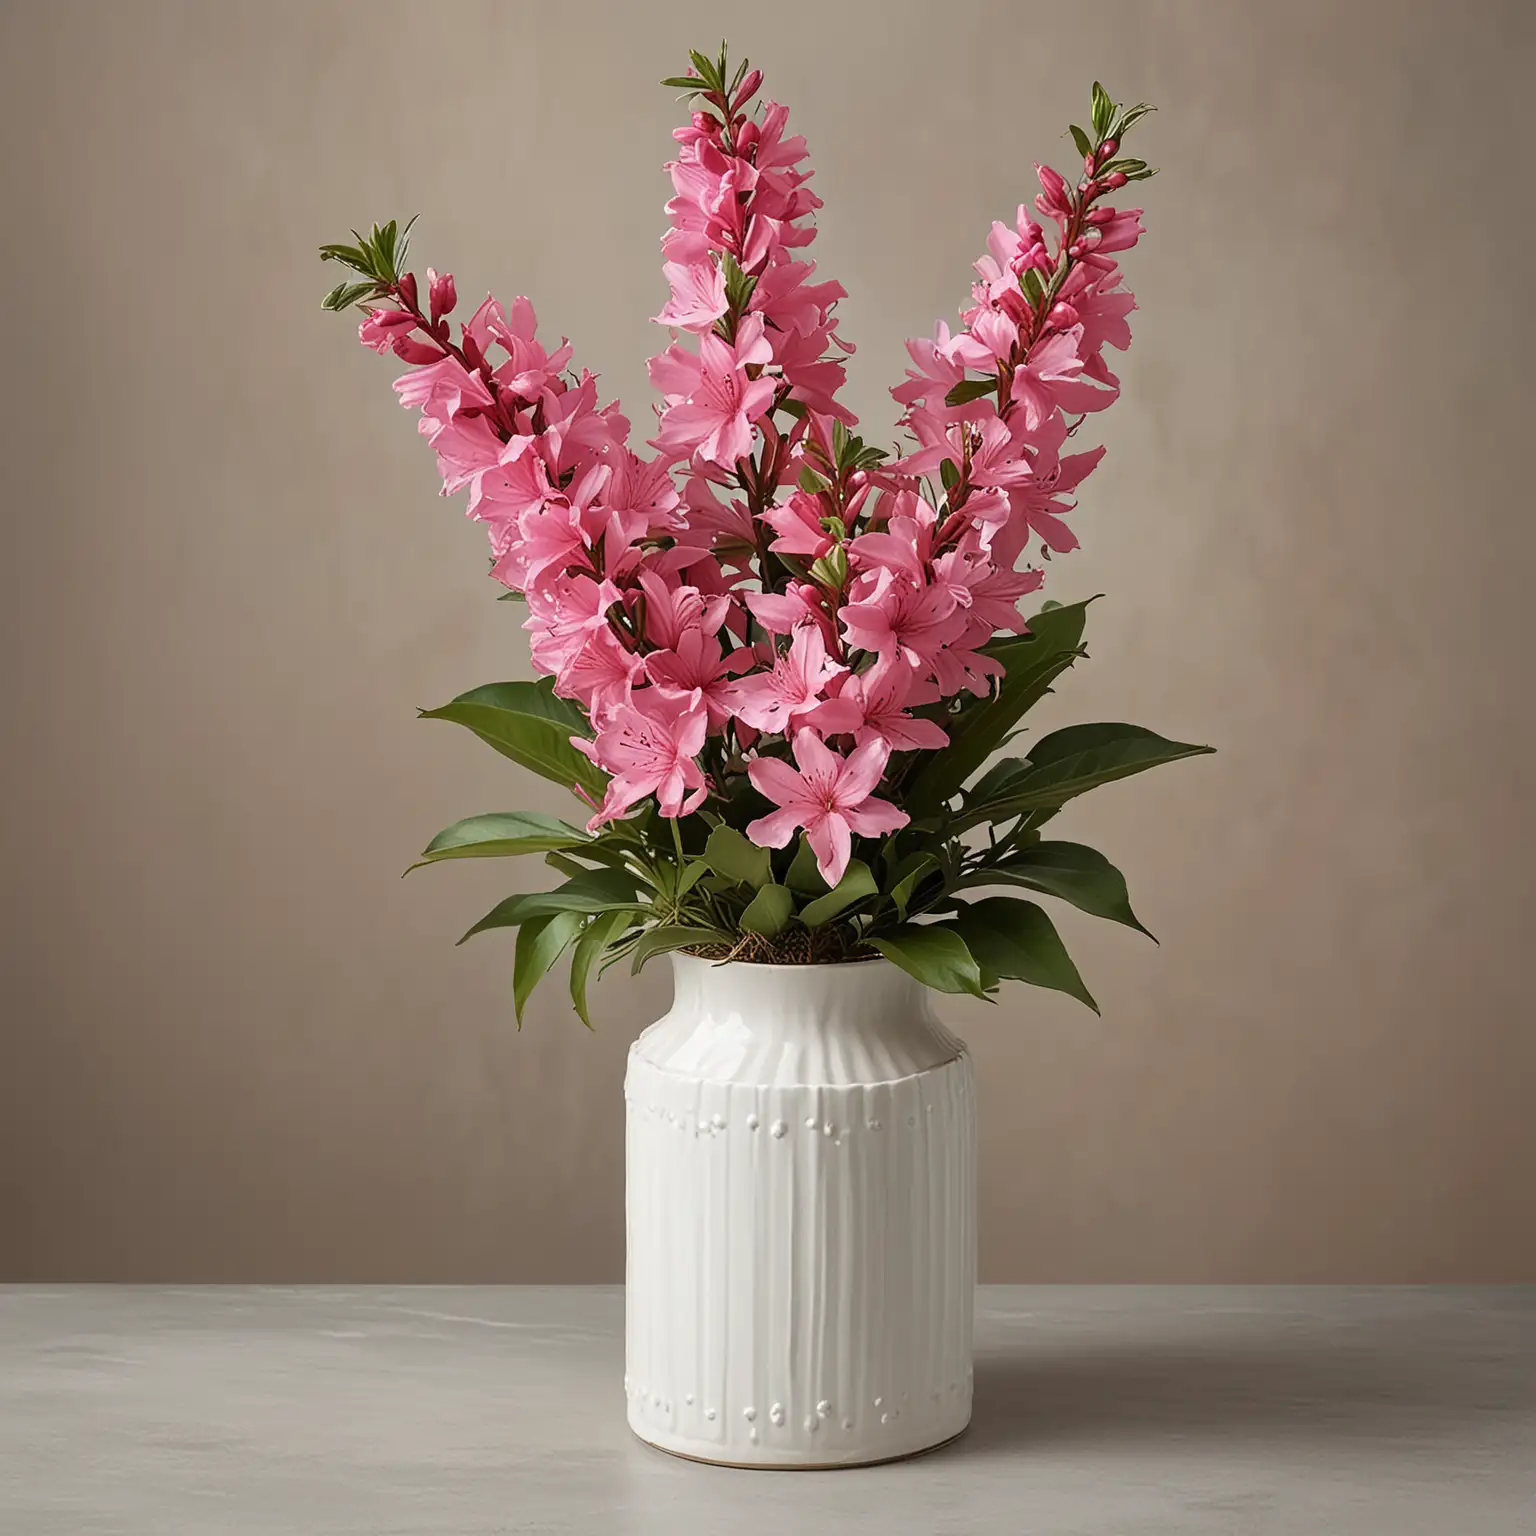 small bouquet of pink azaleas and pink butterfly bush delight stems in modern white cylinder vase; keep background neutral